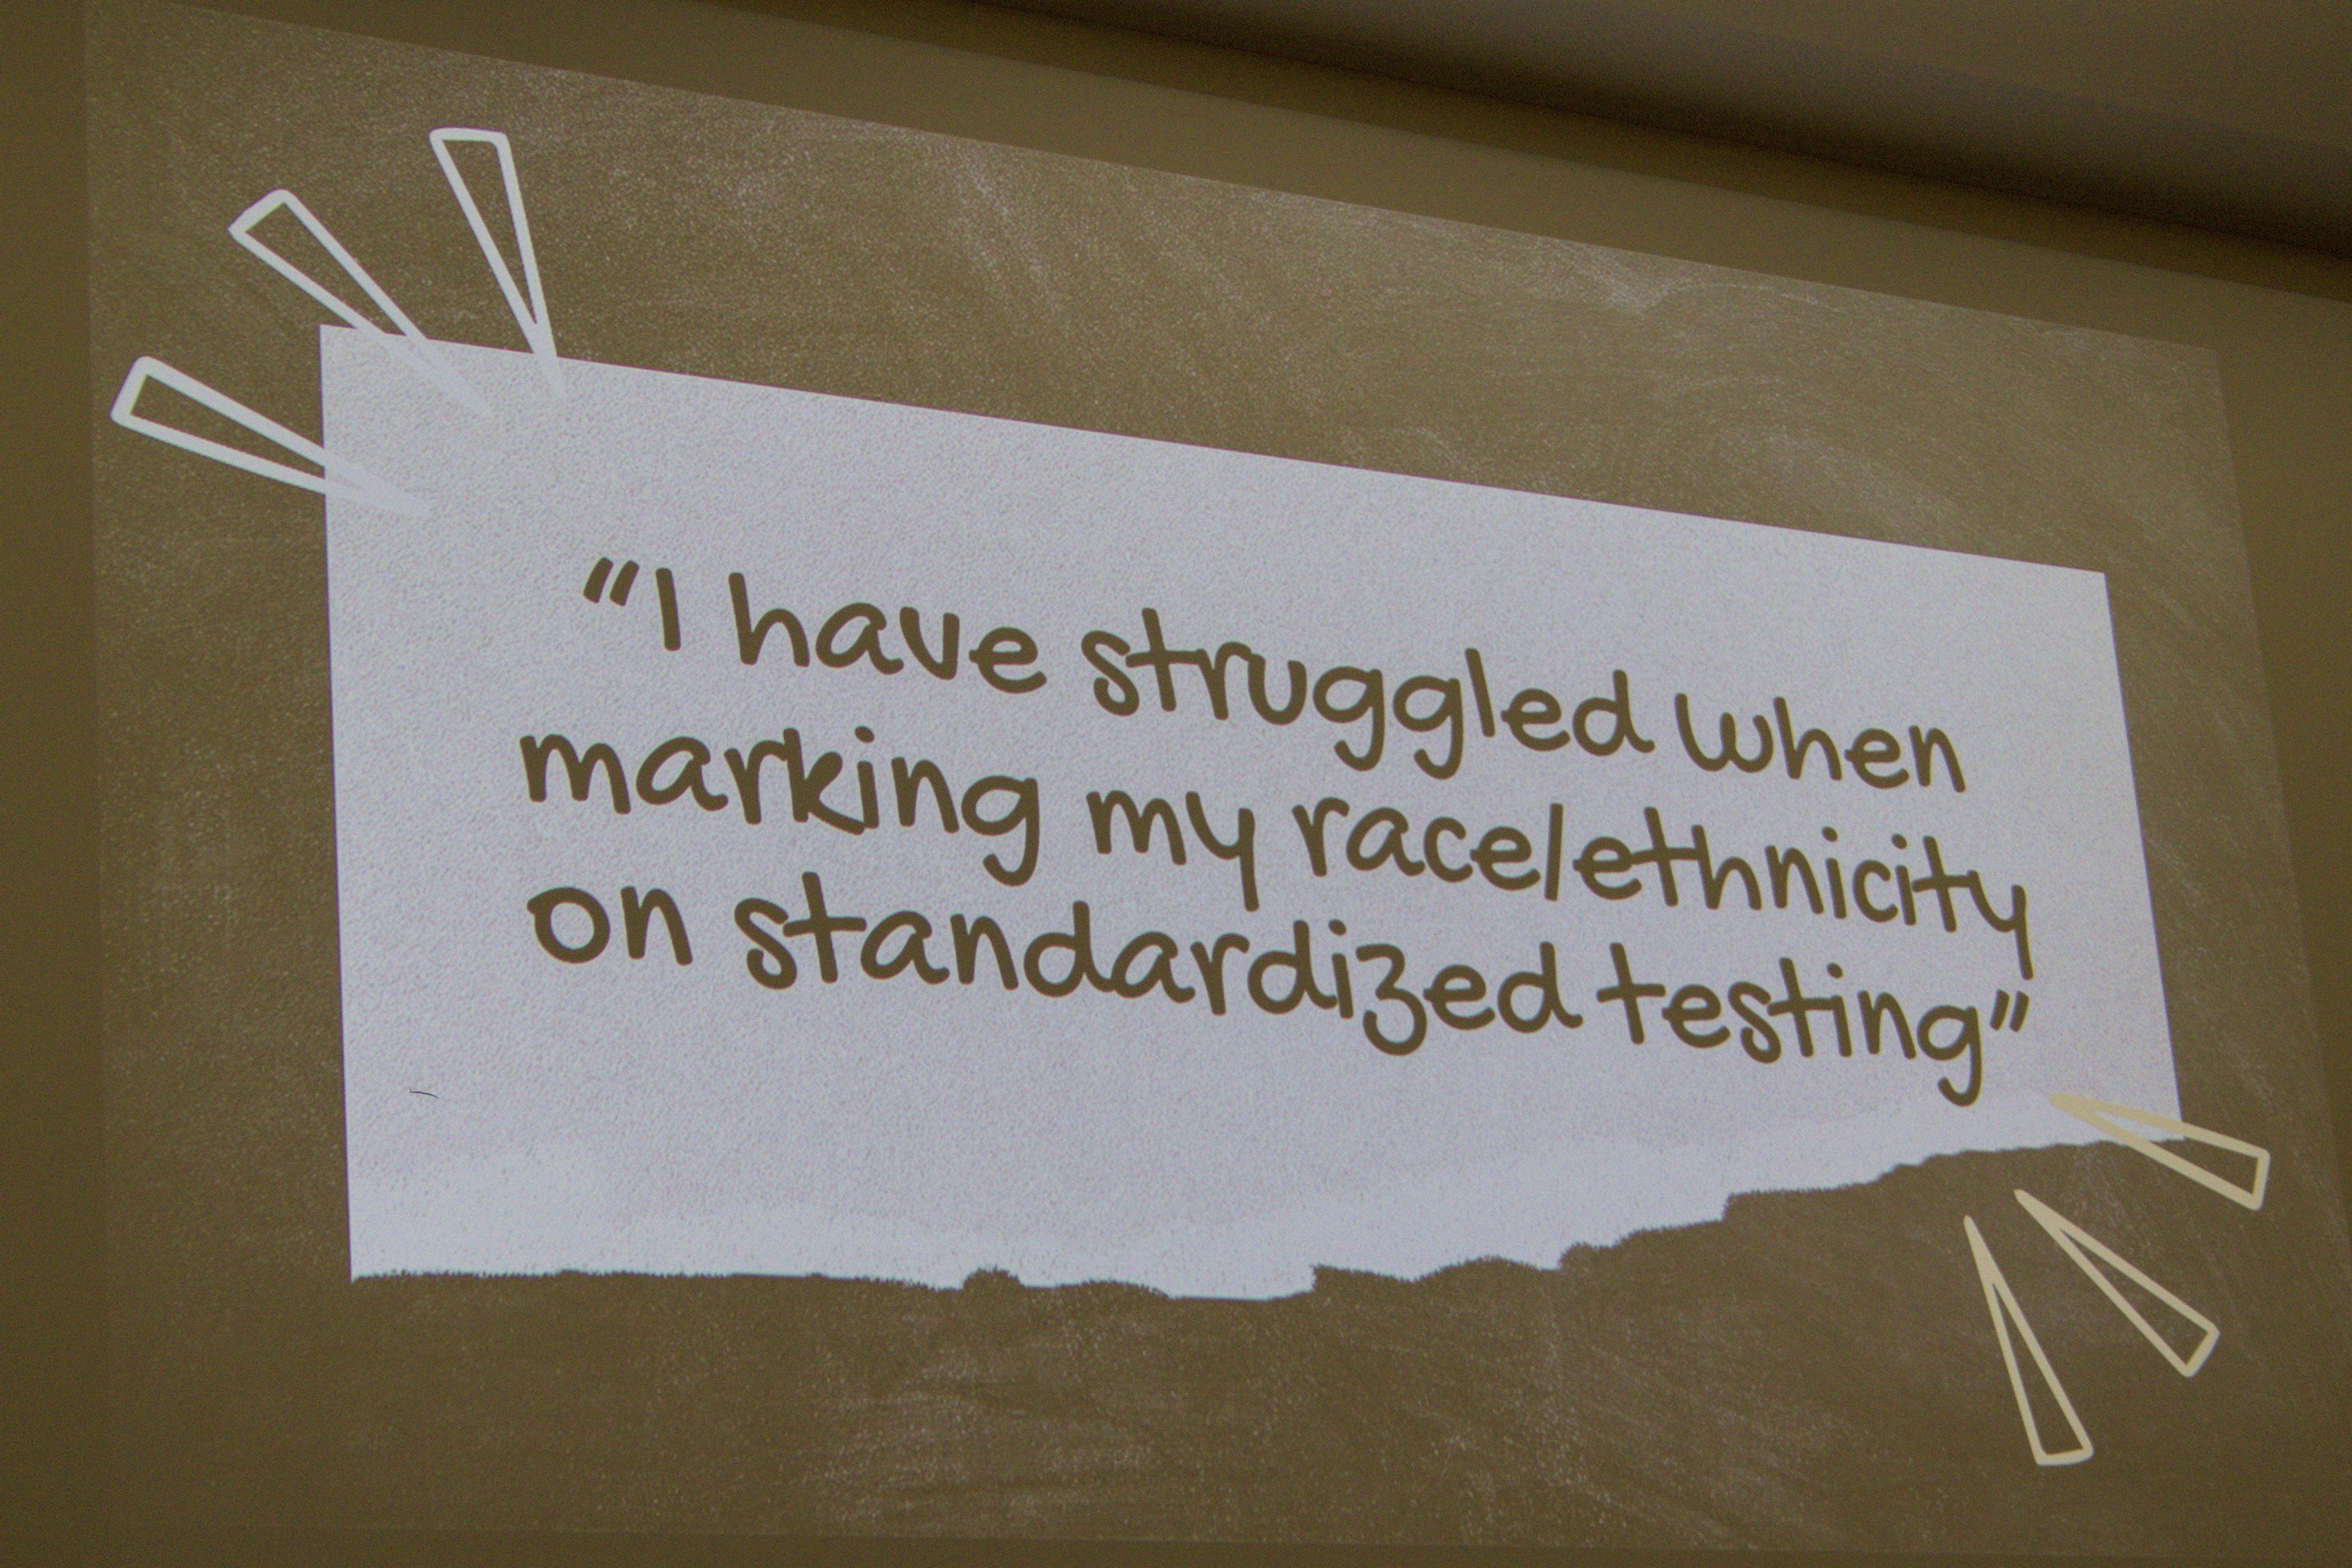 One prompt emphasized the impact of standardized testing on identity.